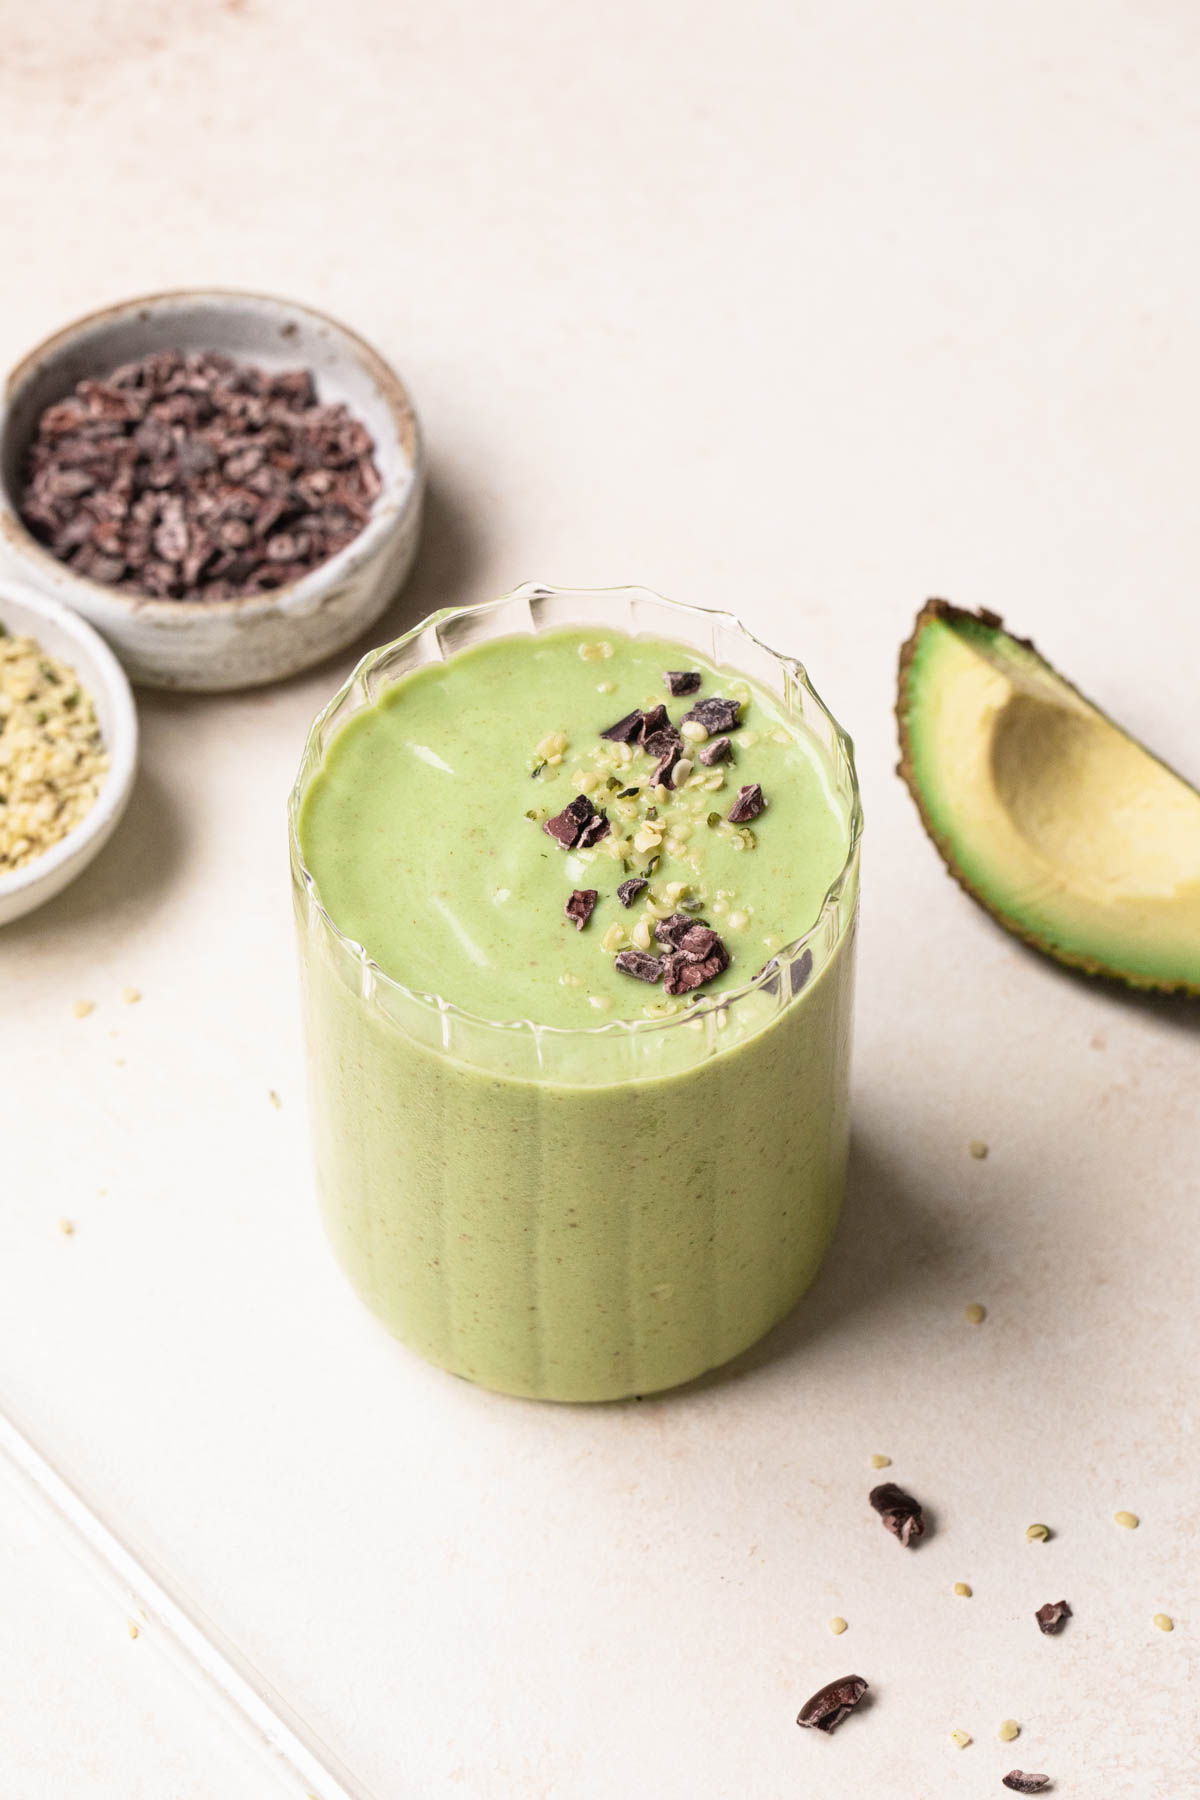 Green smoothie in a clear glass topped with hemp seeds and cacao nibs, avocado wedge